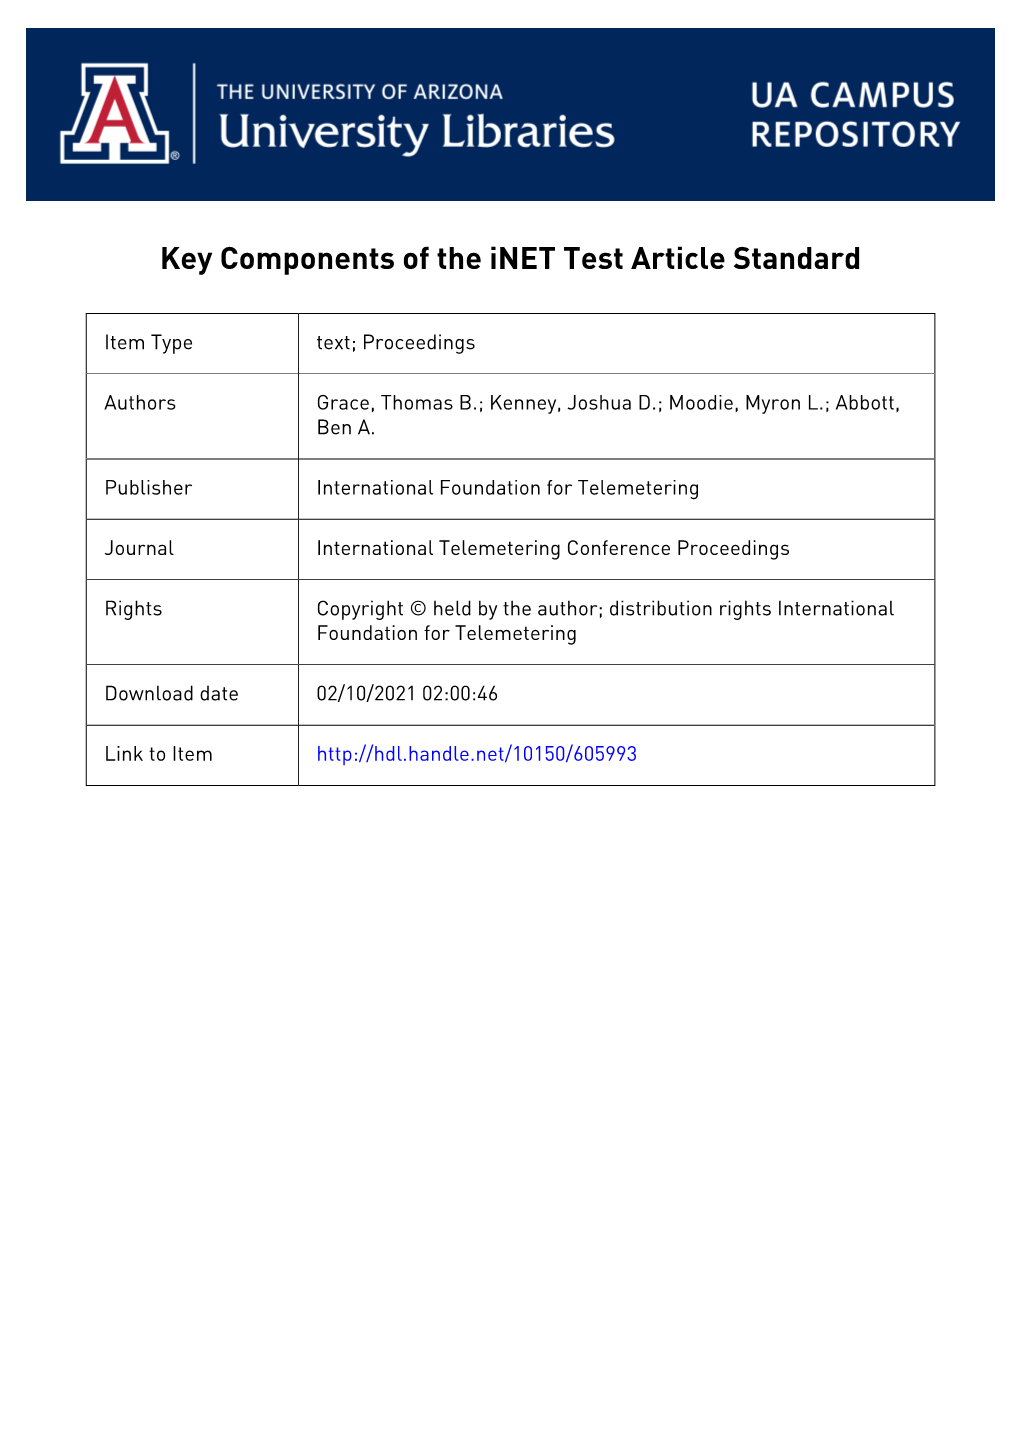 Key Components of the Inet Test Article Standard